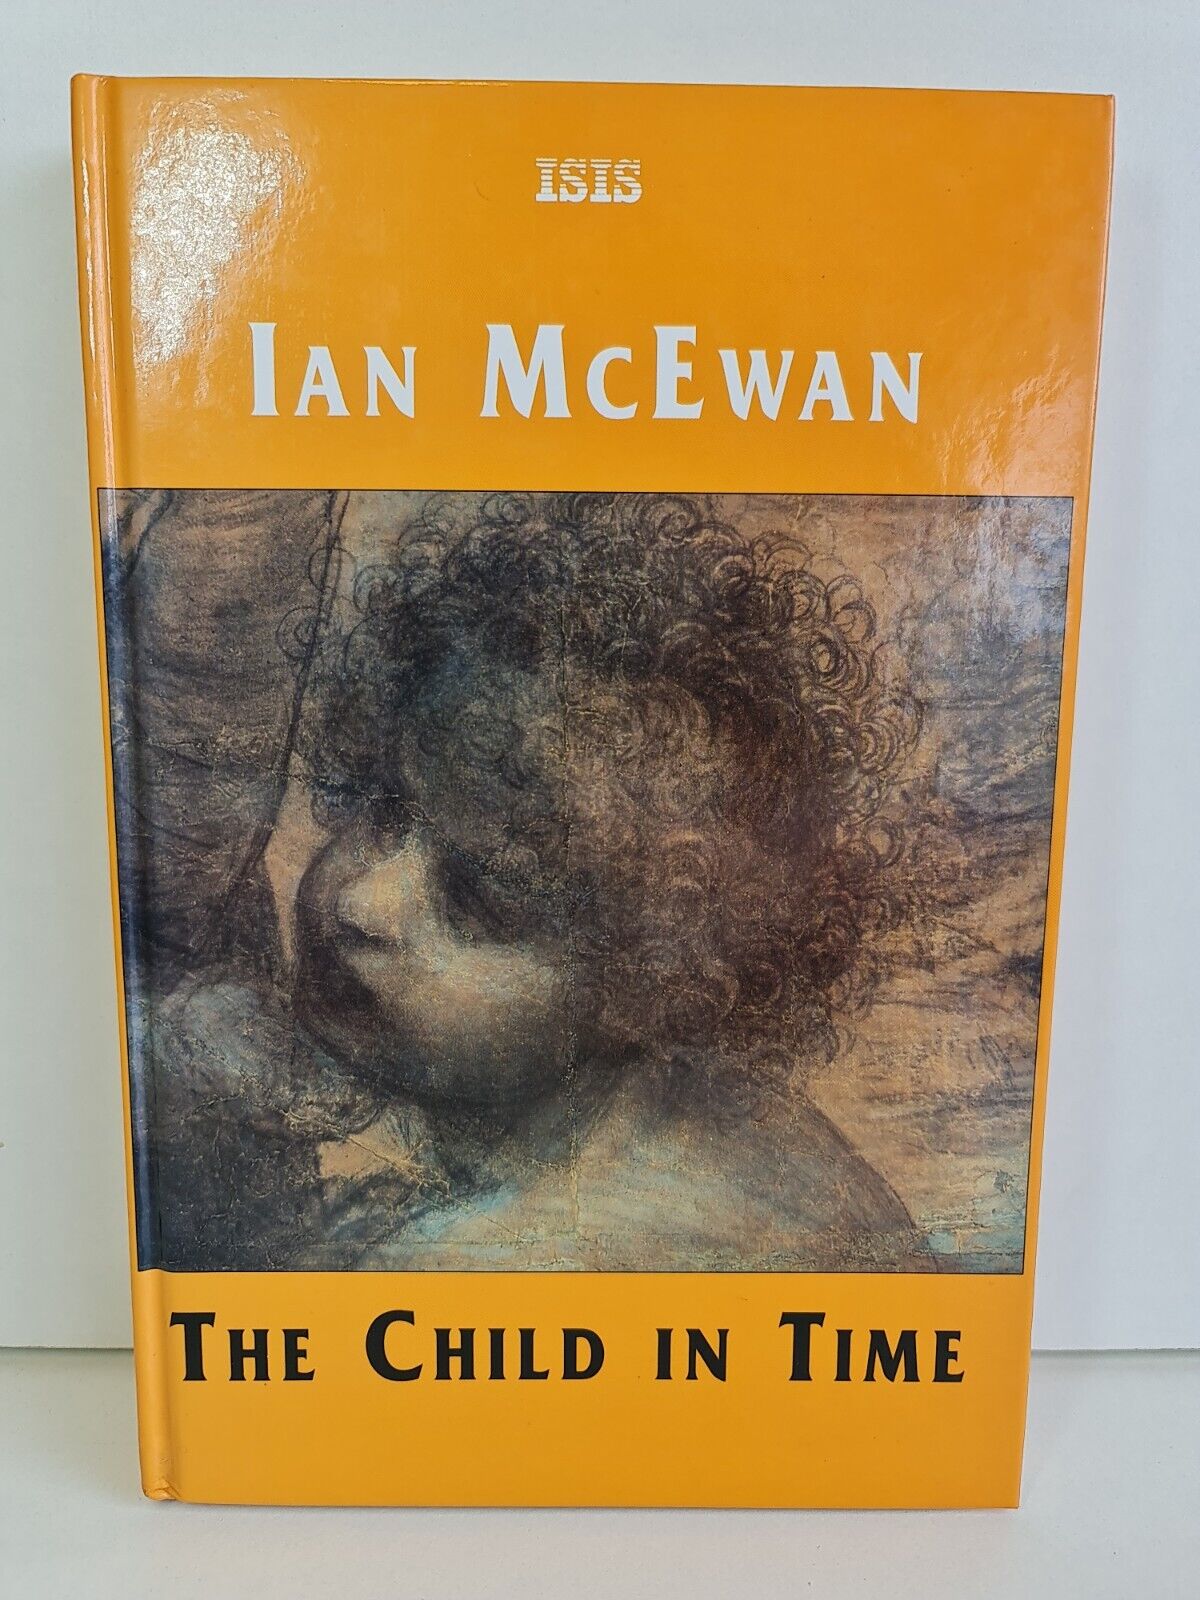 The Child in Time by Ian McEwan (1994- ISIS Large Print)